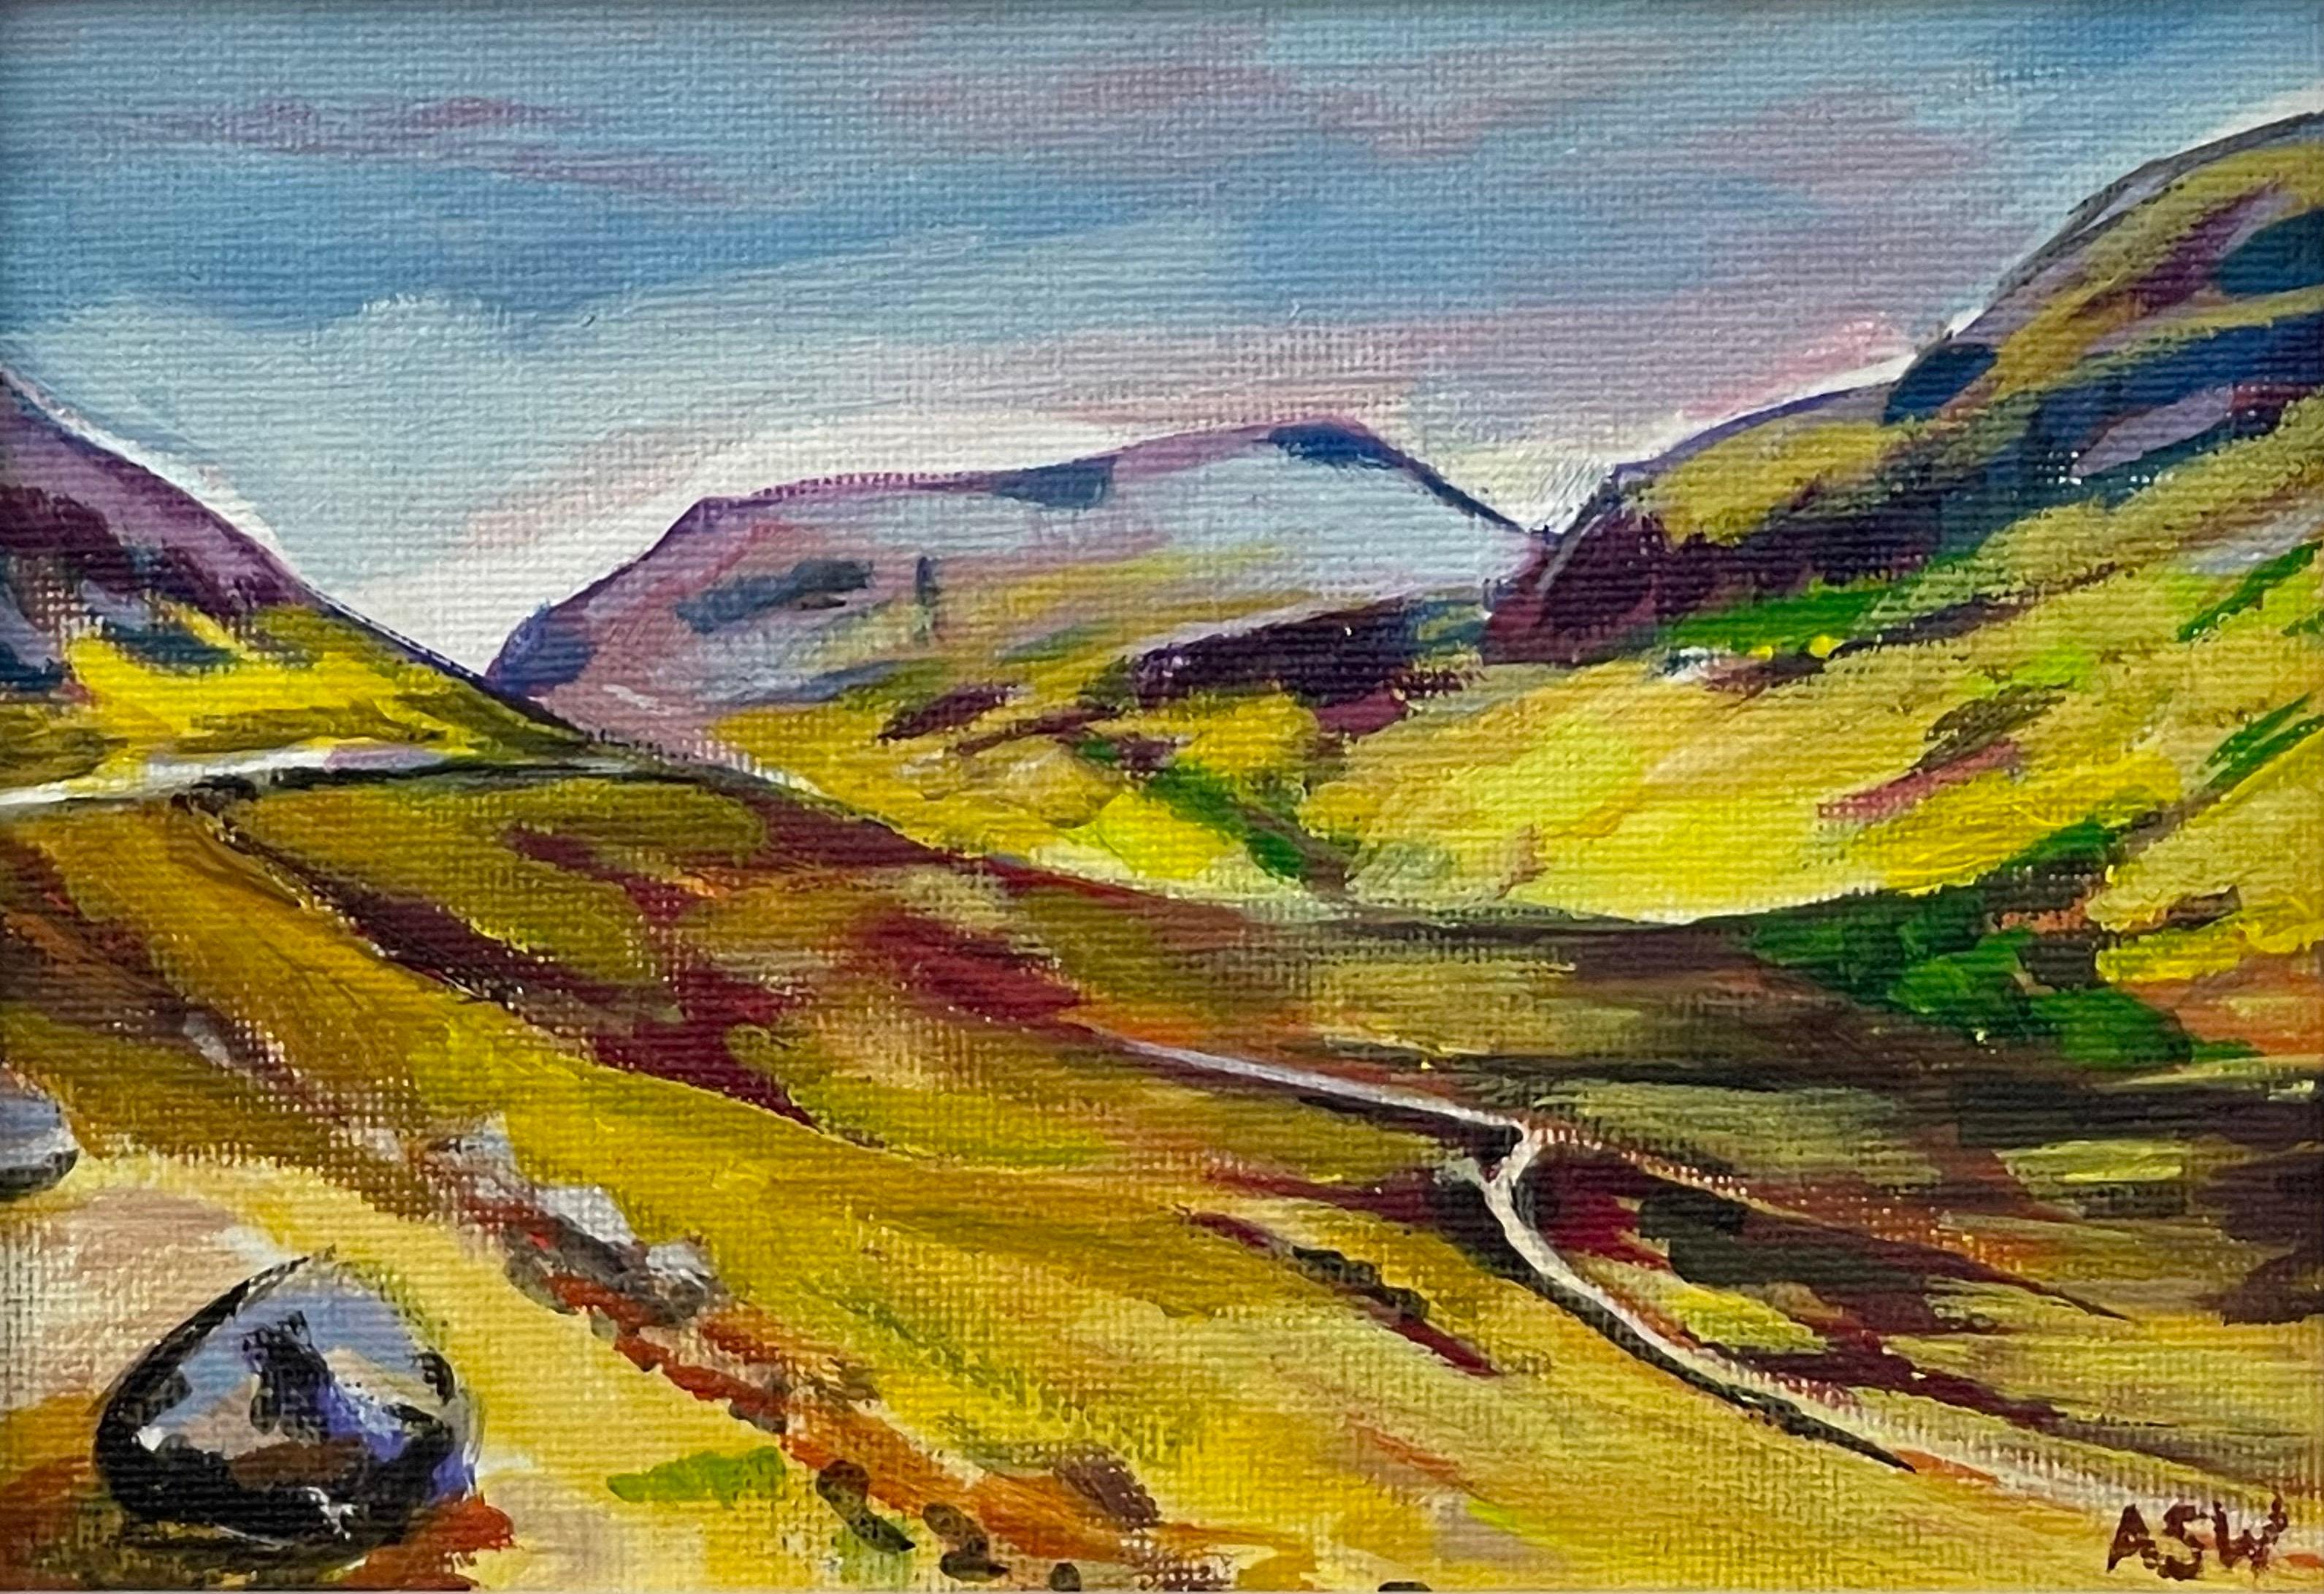 Miniature Landscape Study of Scottish Highlands by Contemporary British Artist - Gray Abstract Painting by Angela Wakefield